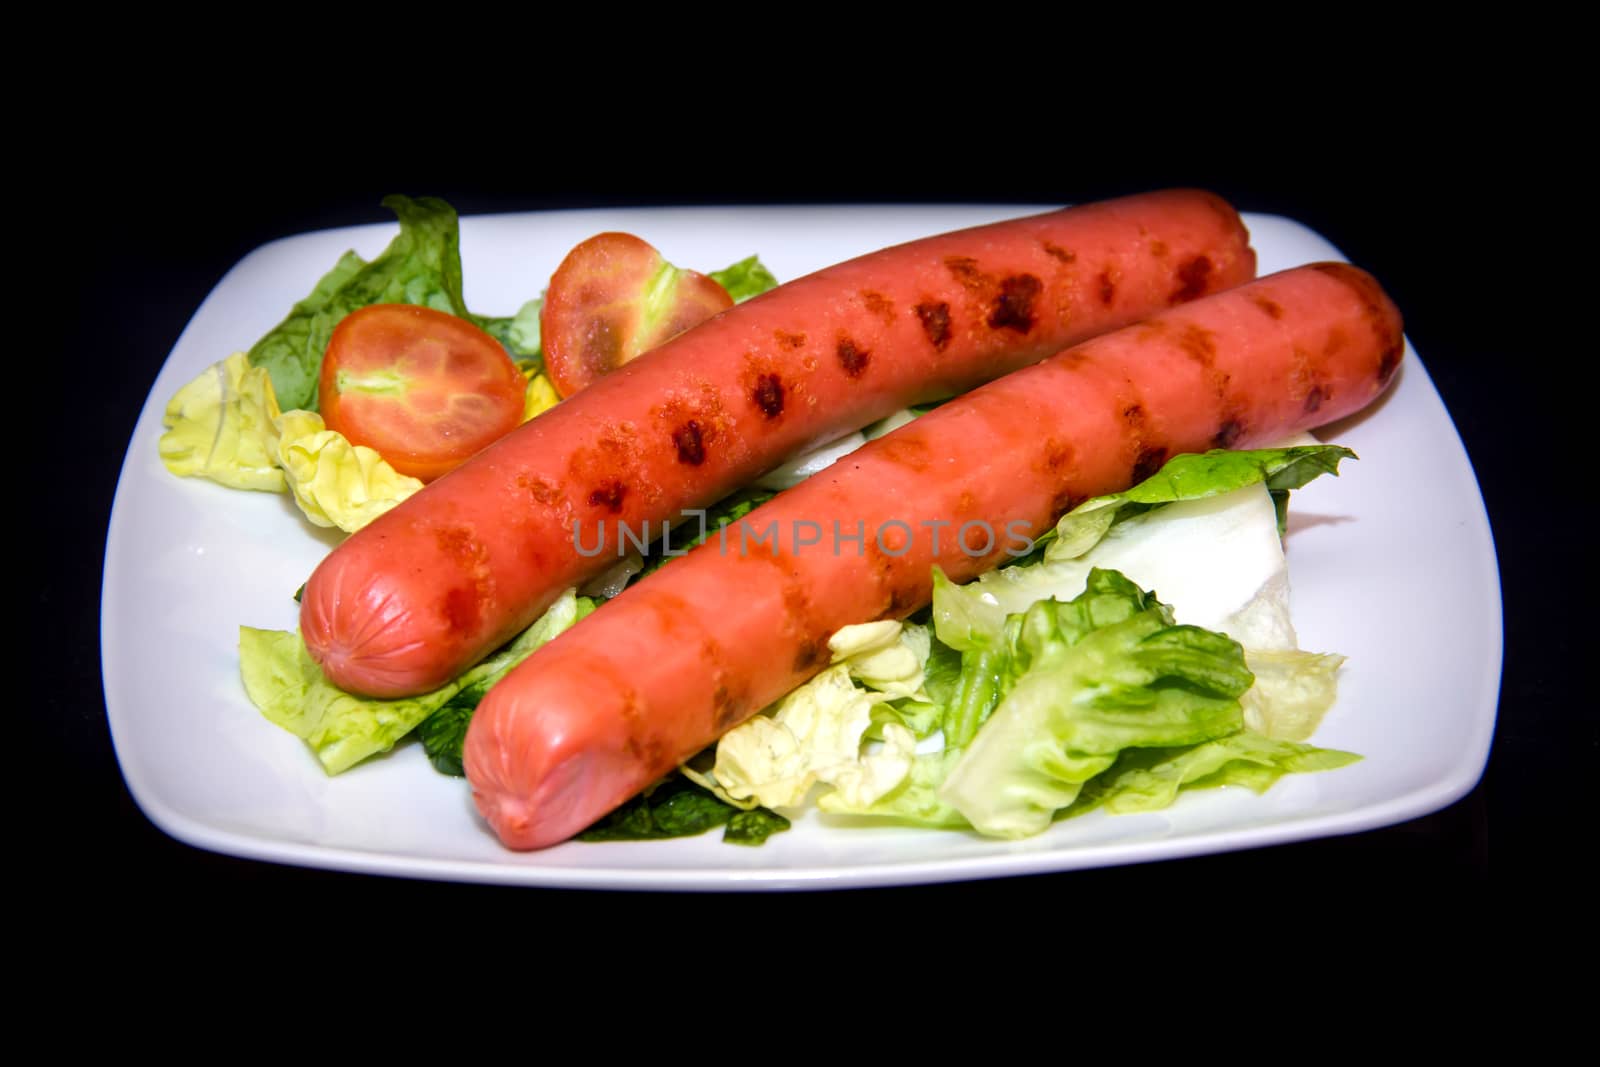 Sausages with salad on black by spafra